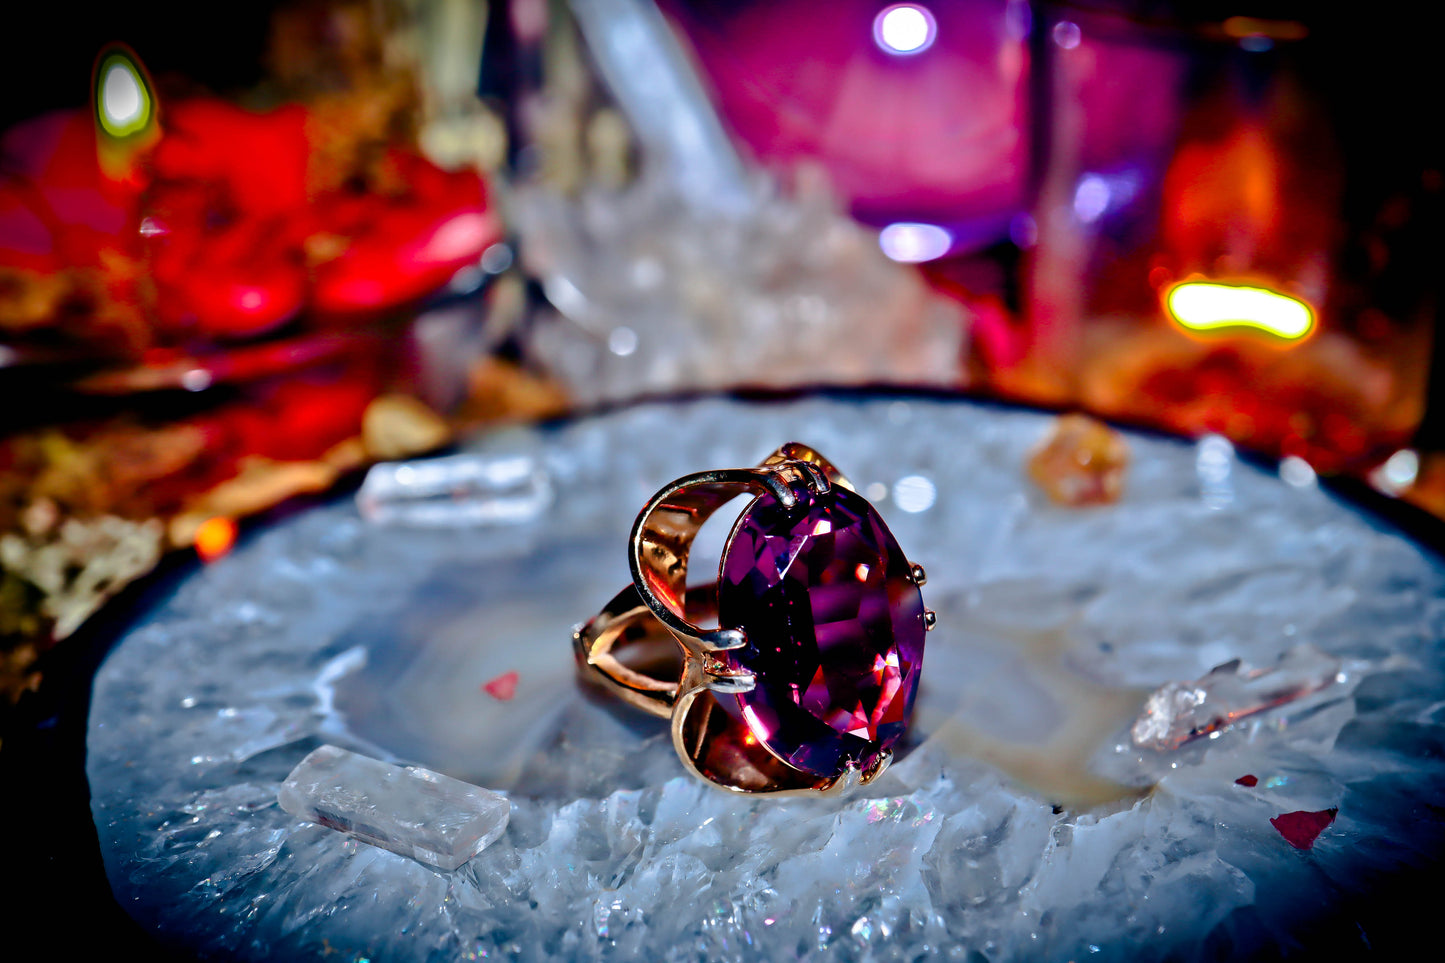 **POWERFUL** GENDER SHAPRESHIFT Charm Ring! Change Your Gender Shapeshifting Beauty Spell Haunted Ring LGBTQ Magick Occult Real Power + Happiness & Blessings! * RARE $$ ~ Love! MEGA POWER X3!